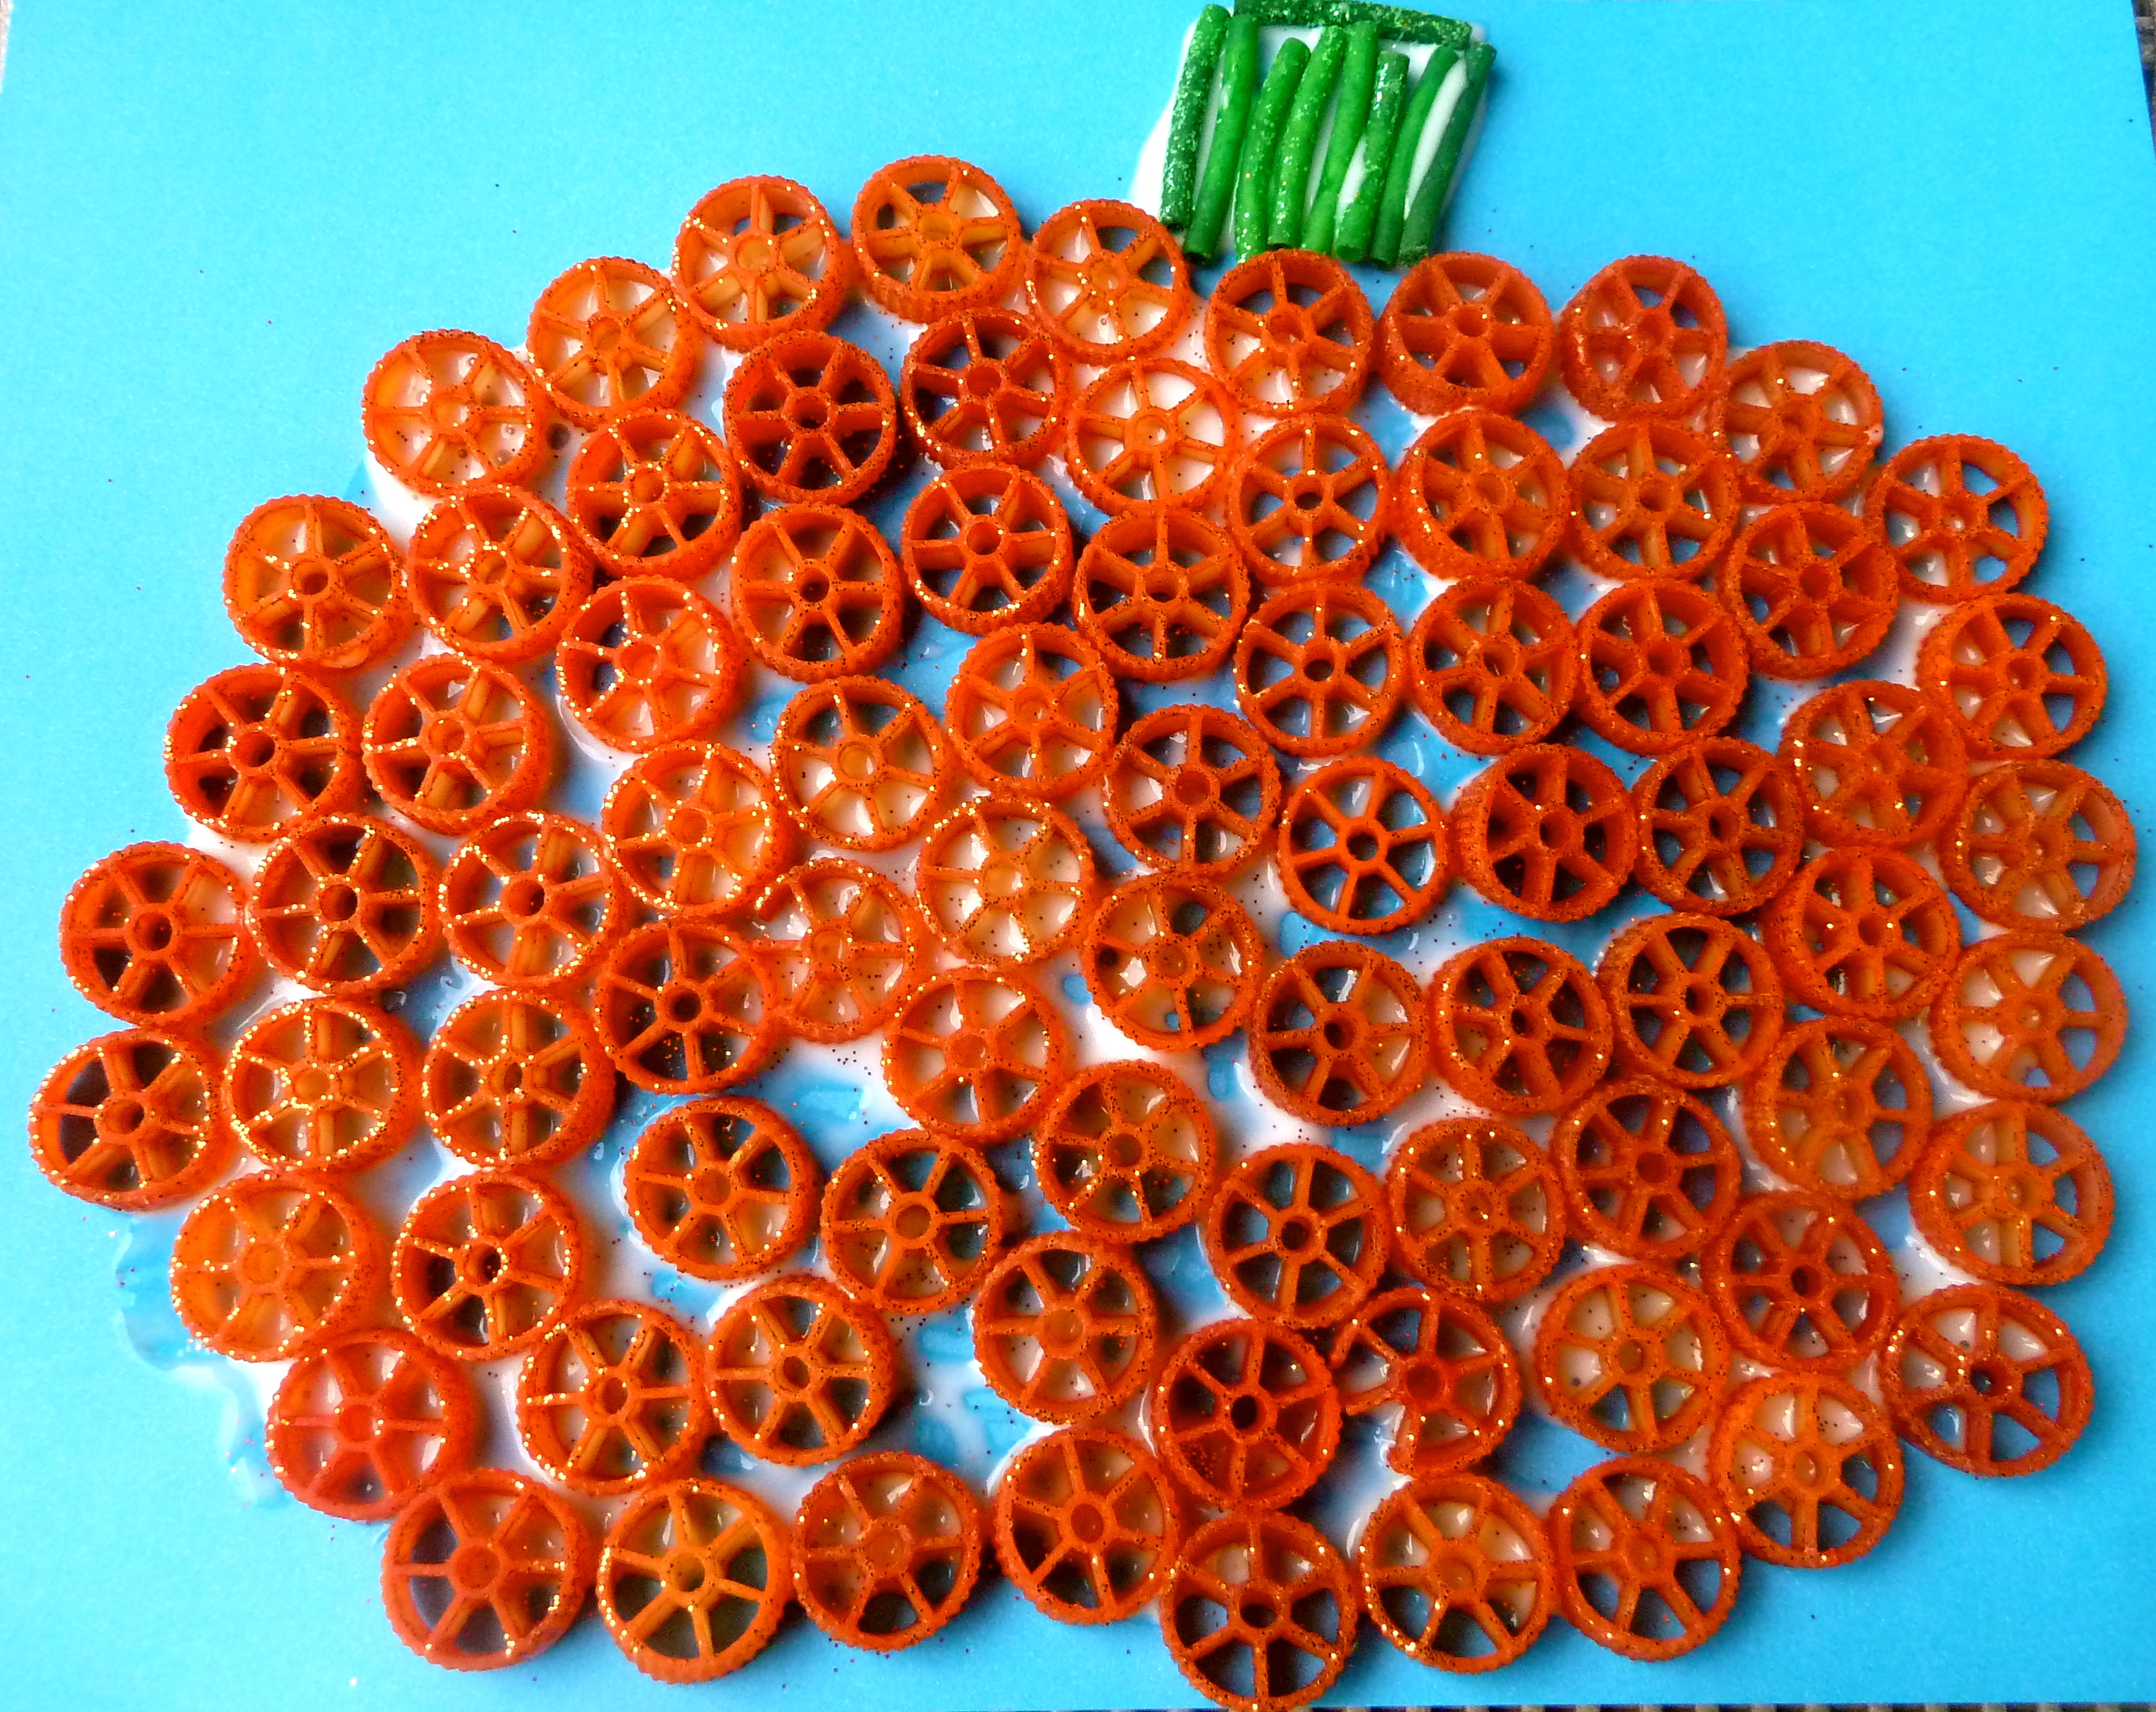 200 Pack of Stick On Craft Googly Eyes - Arts and Crafts - Glow